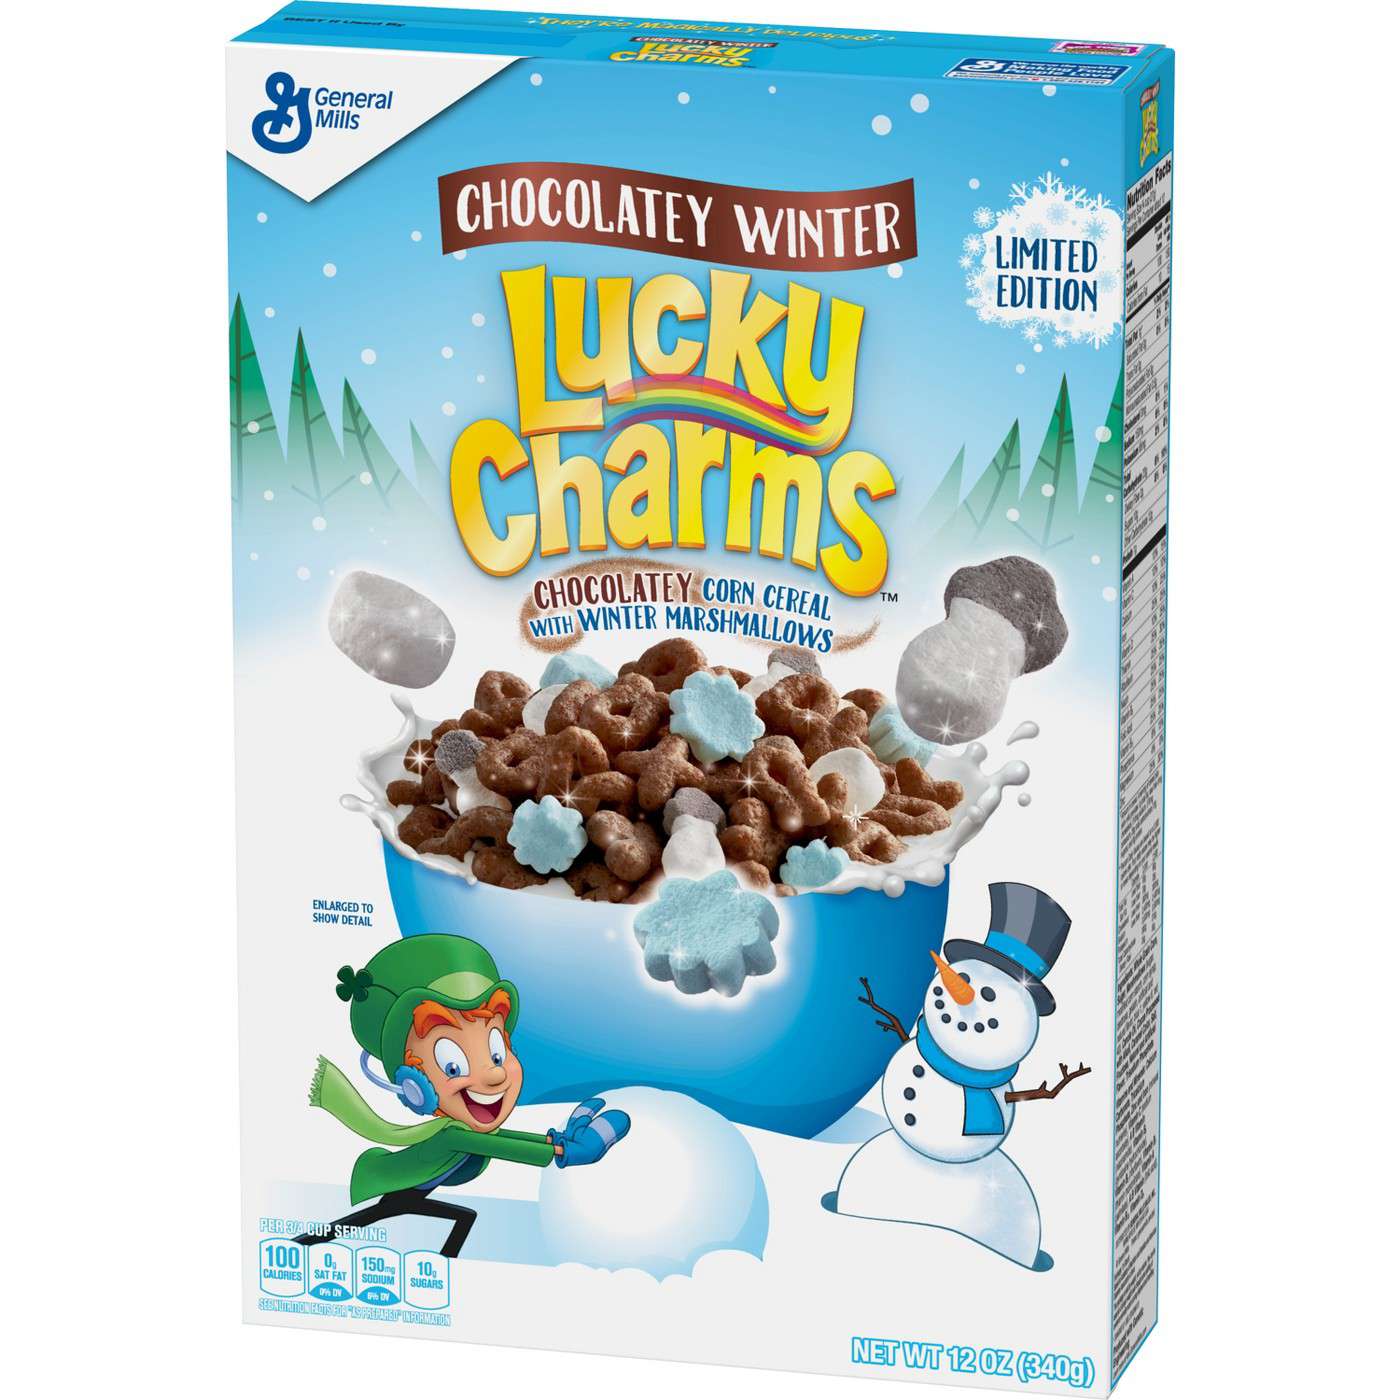 Blue box of Chocolatey Winter Lucky Charms